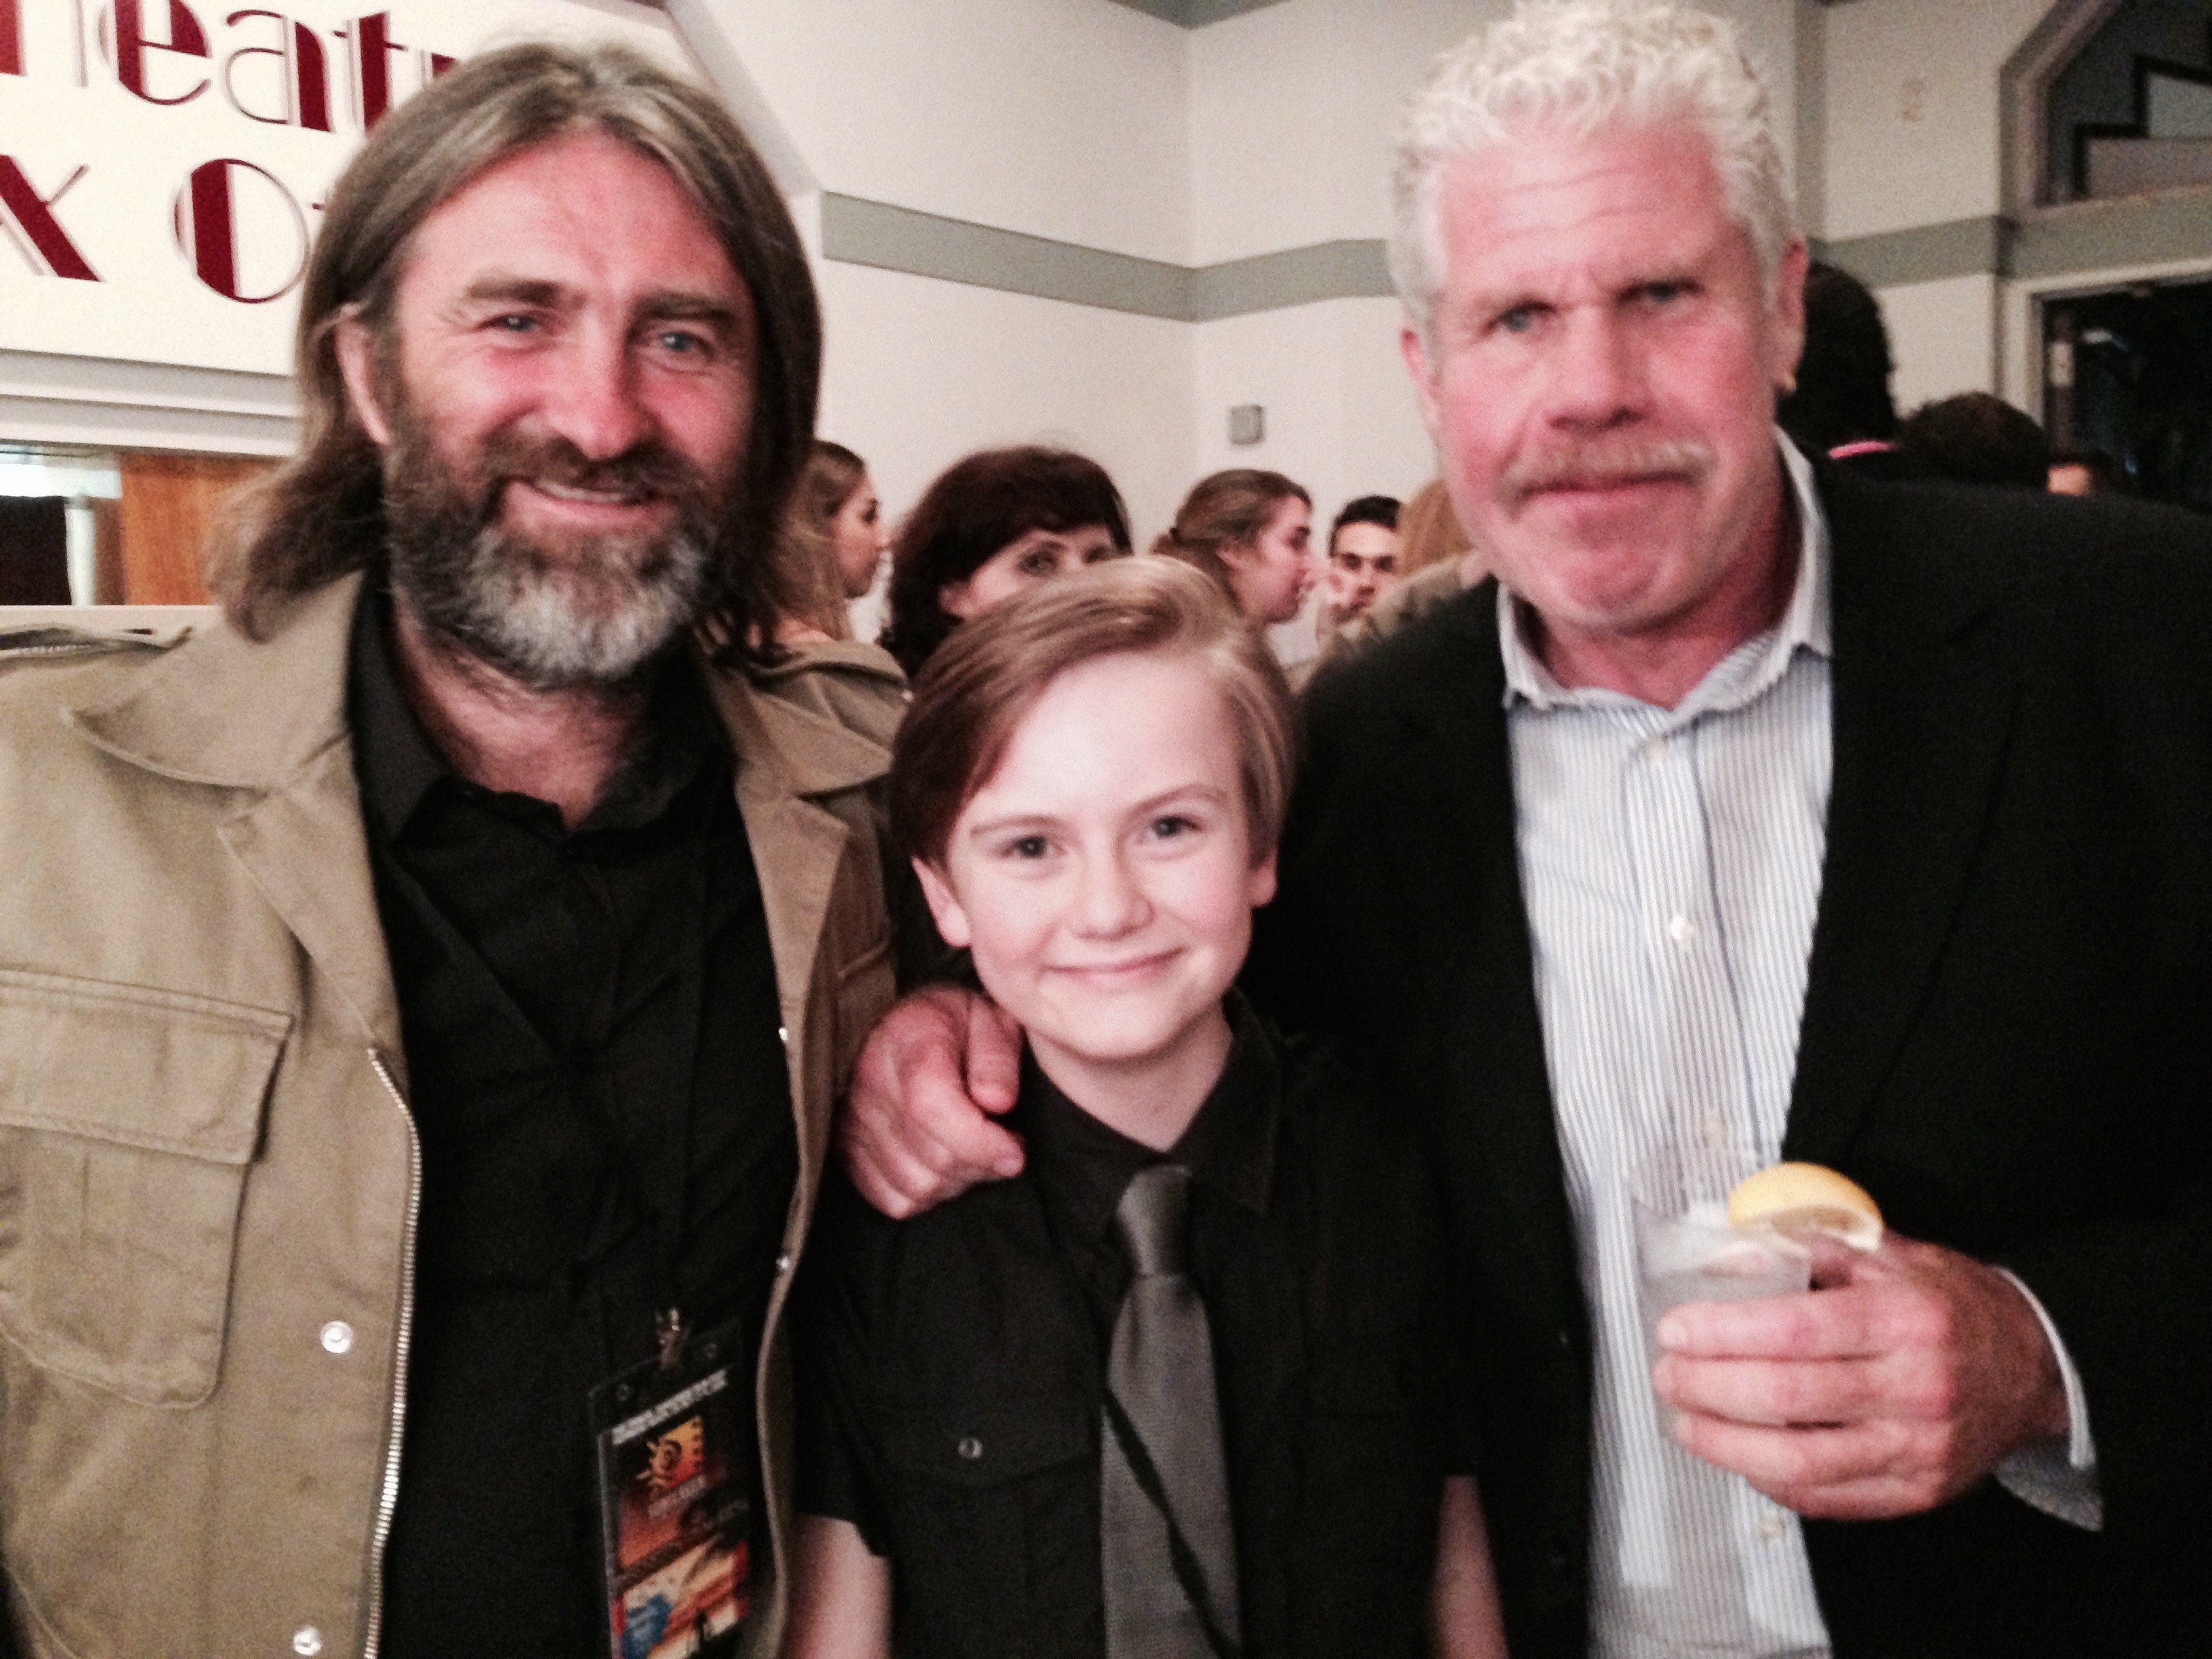 Major with Ross Clarke (Director) and Ron Perlman at screening of Desiree (Dermaphoria)